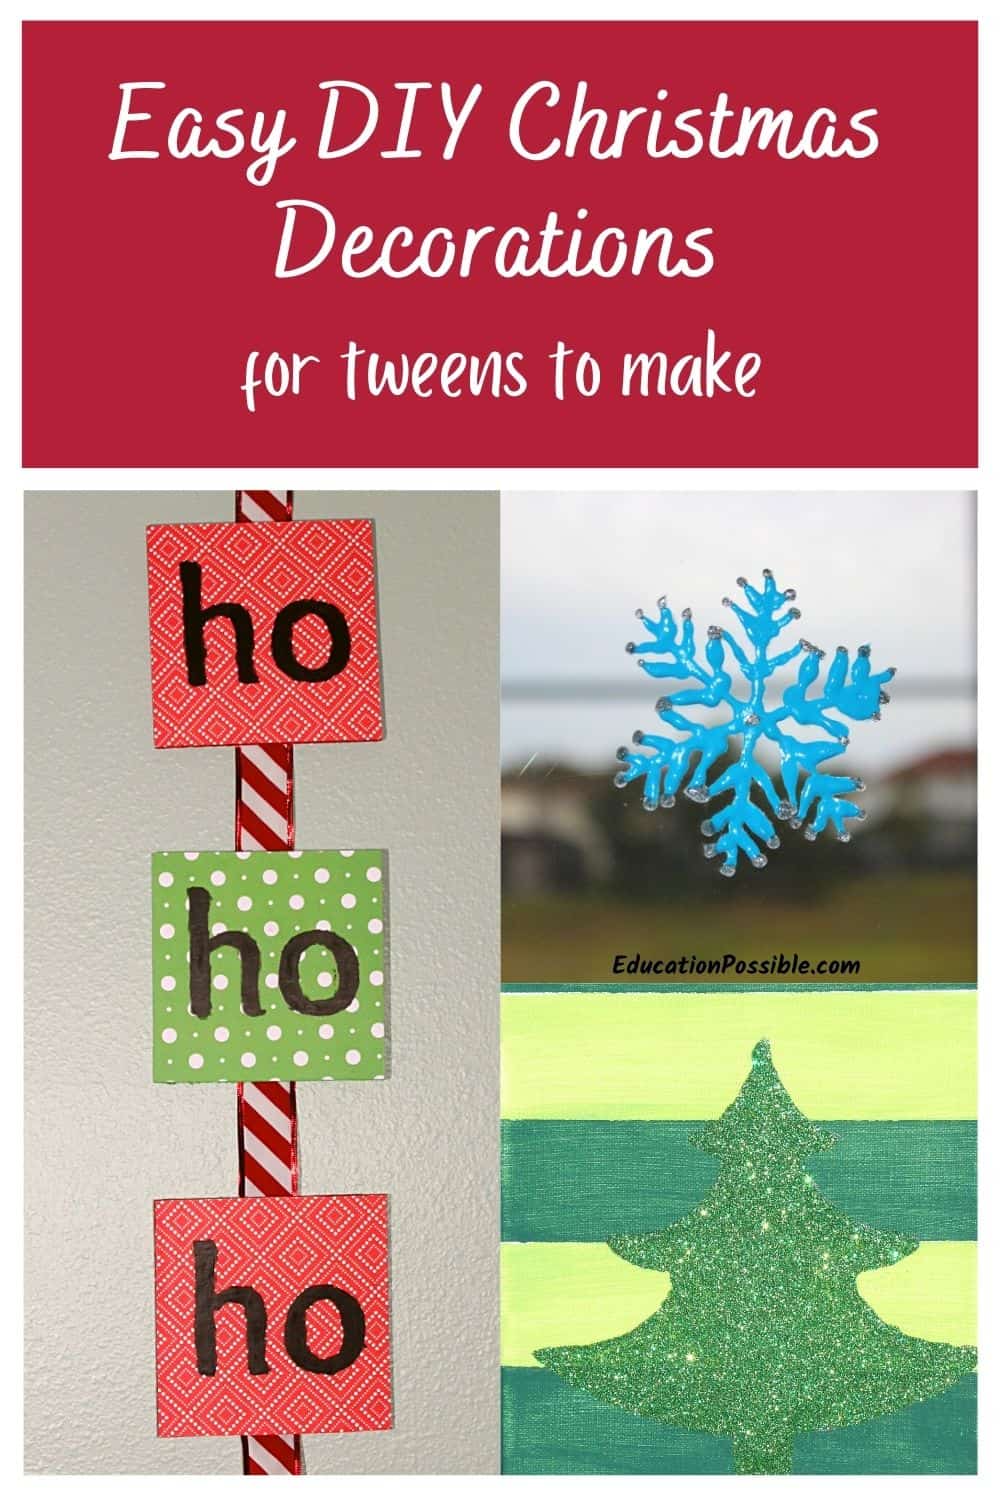 3 DIY Christmas decorations. Ho-Ho-Ho wall hanging, blue snowflake window cling, green glitter tree painted on green striped canvas.